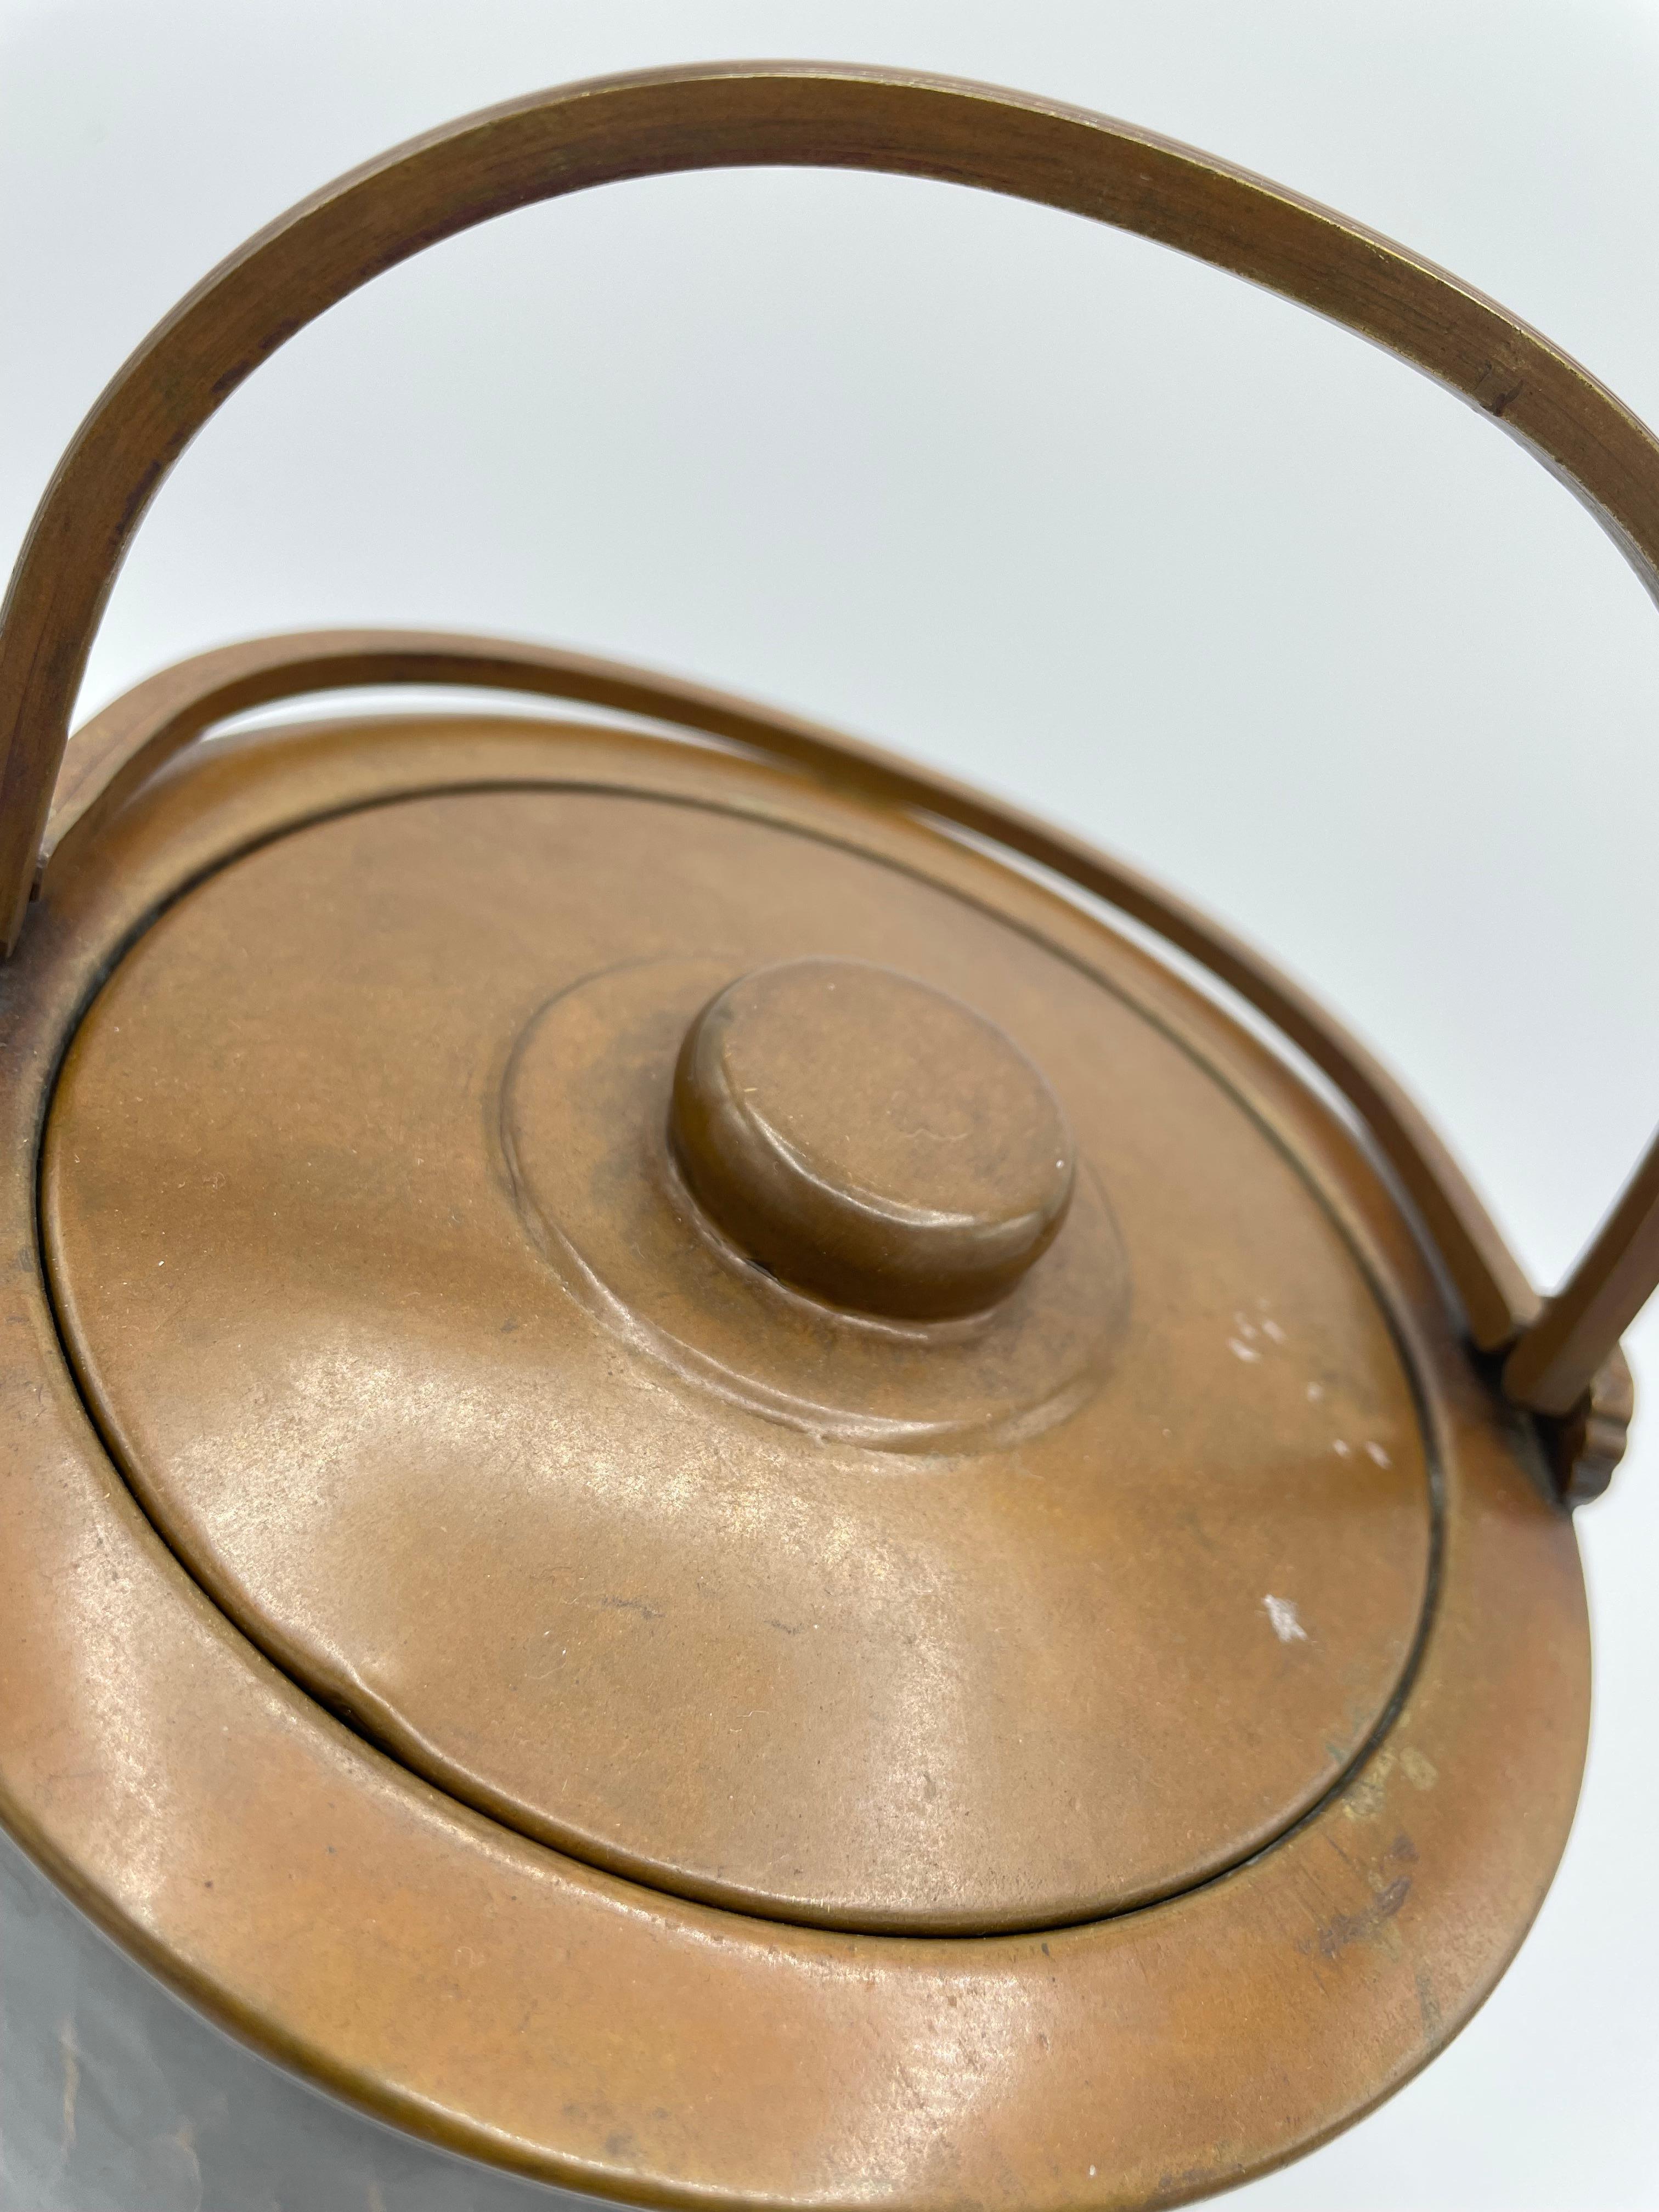 Antique Japanese Pitcher with Copper in 1920s for Tea Ceremony 7